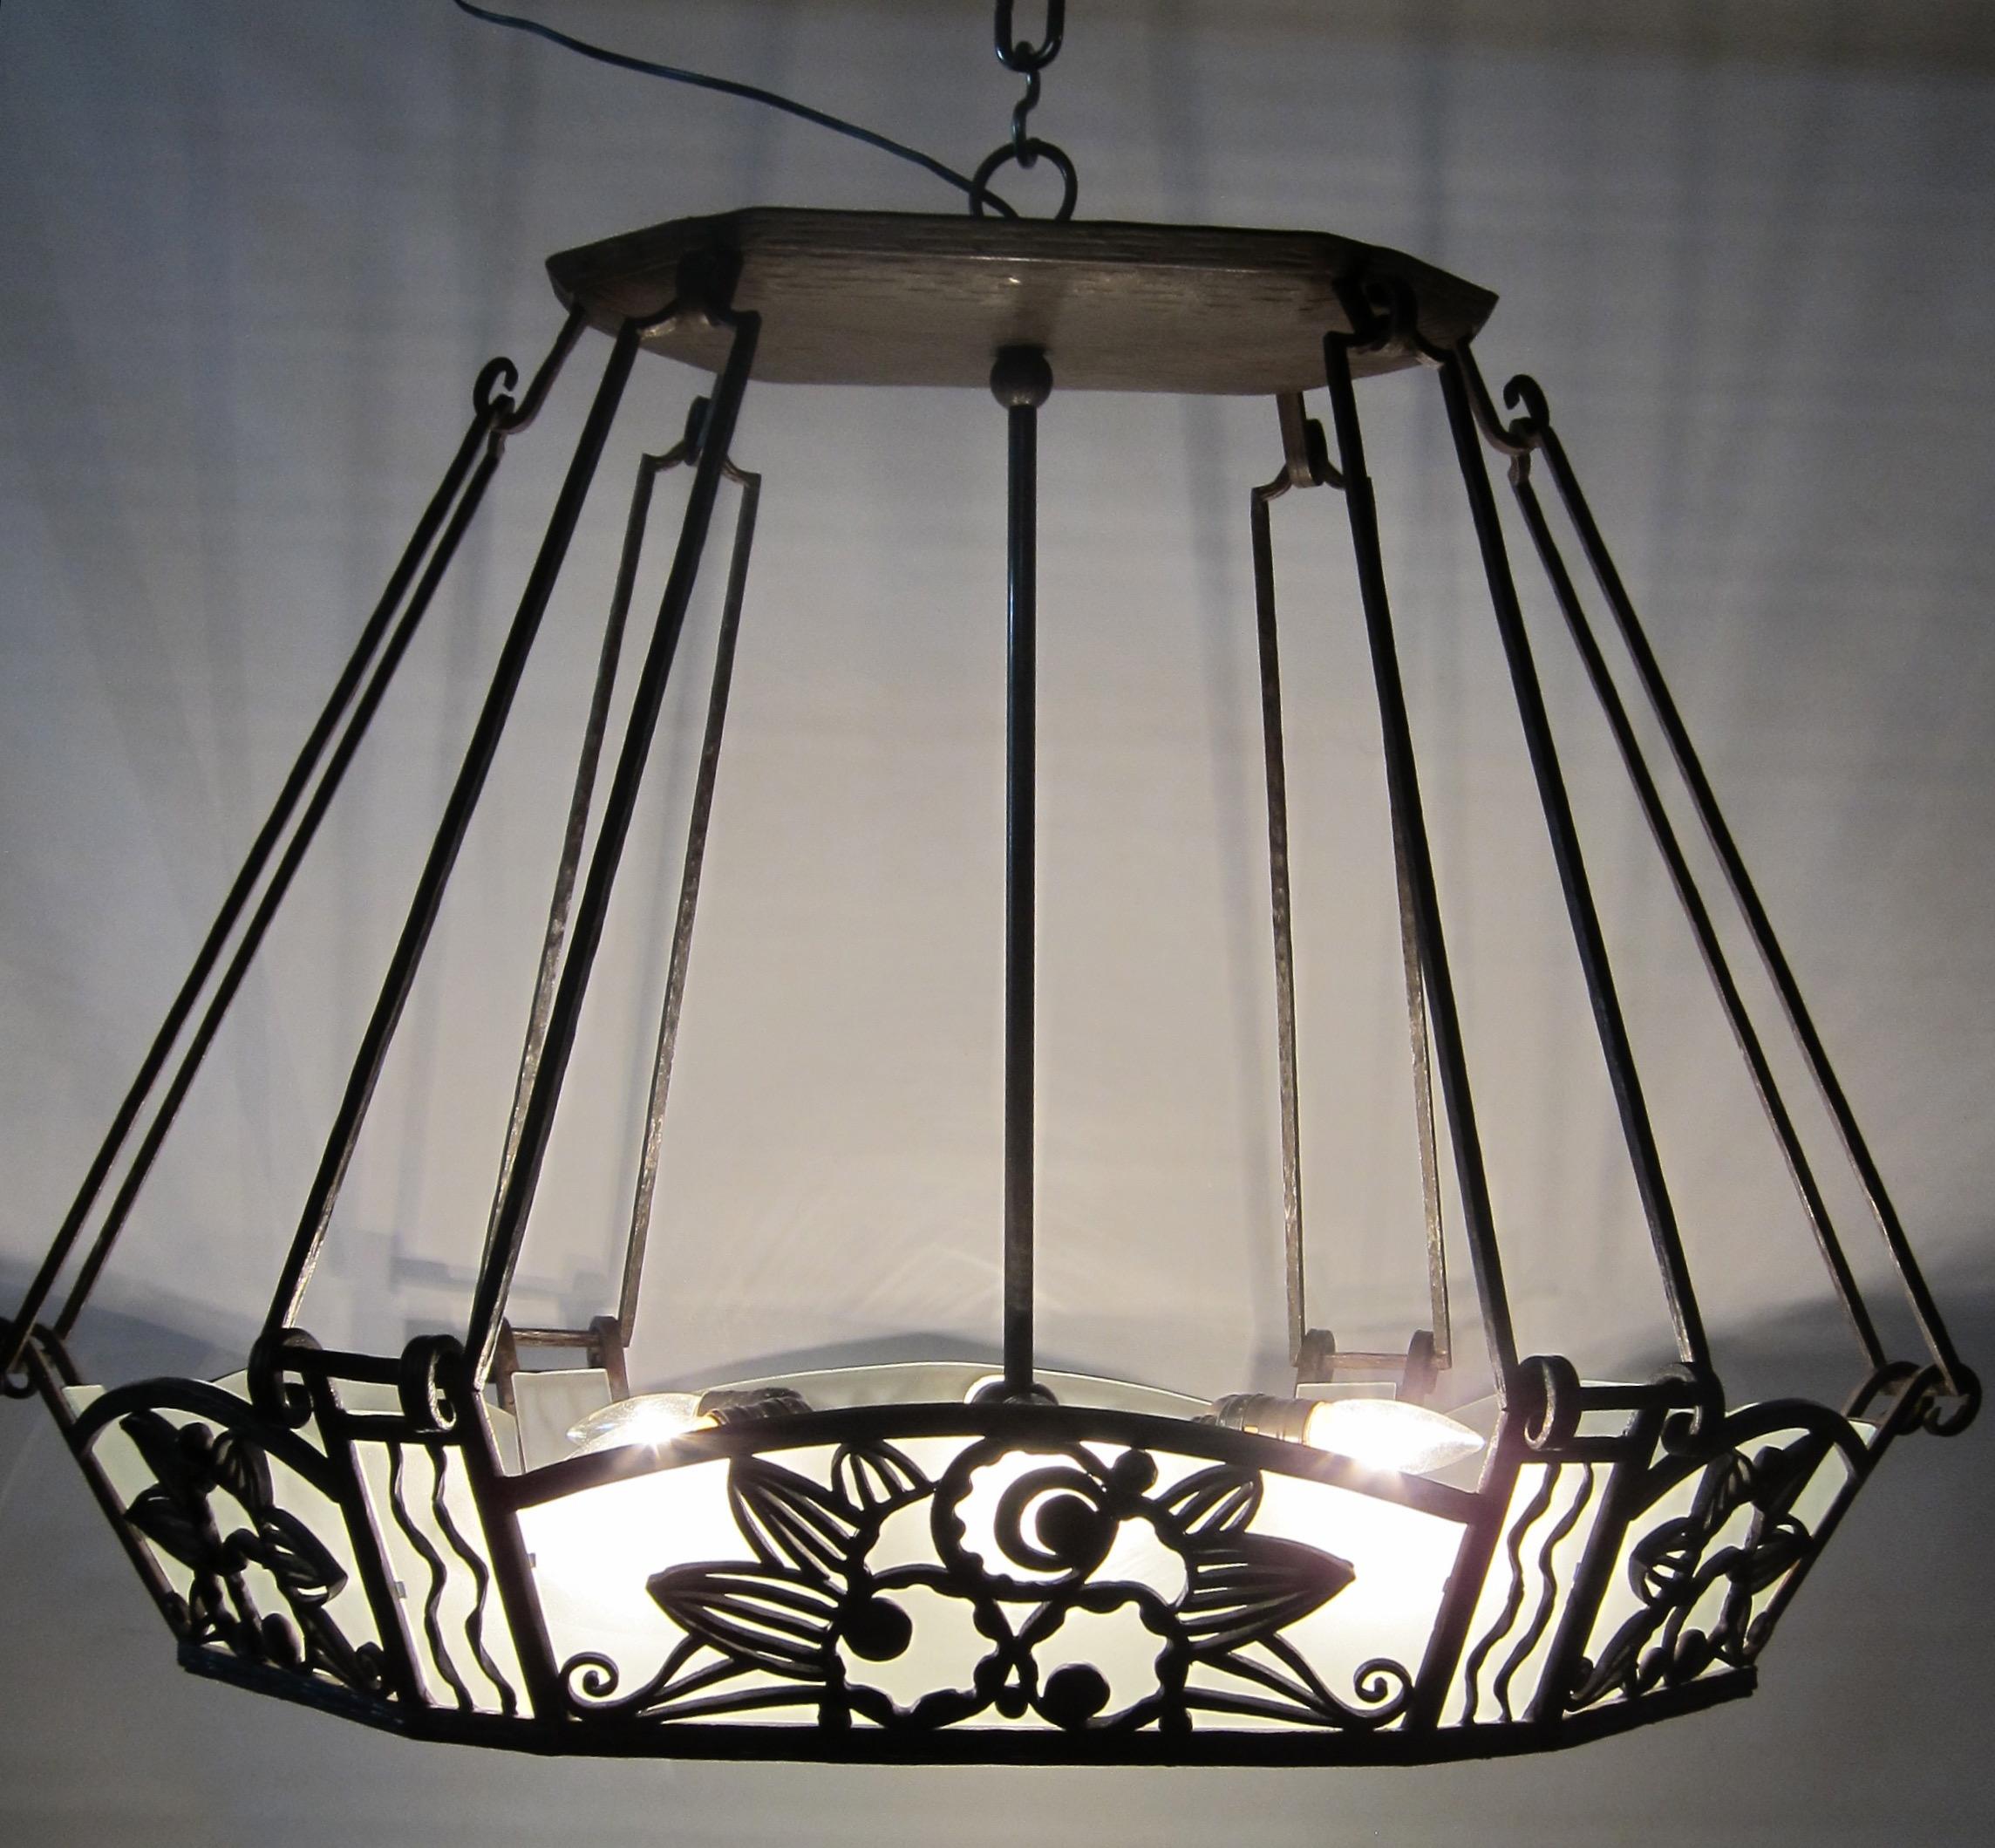 Paul Kiss Wrought Iron and Glass Hanging Fixture 4